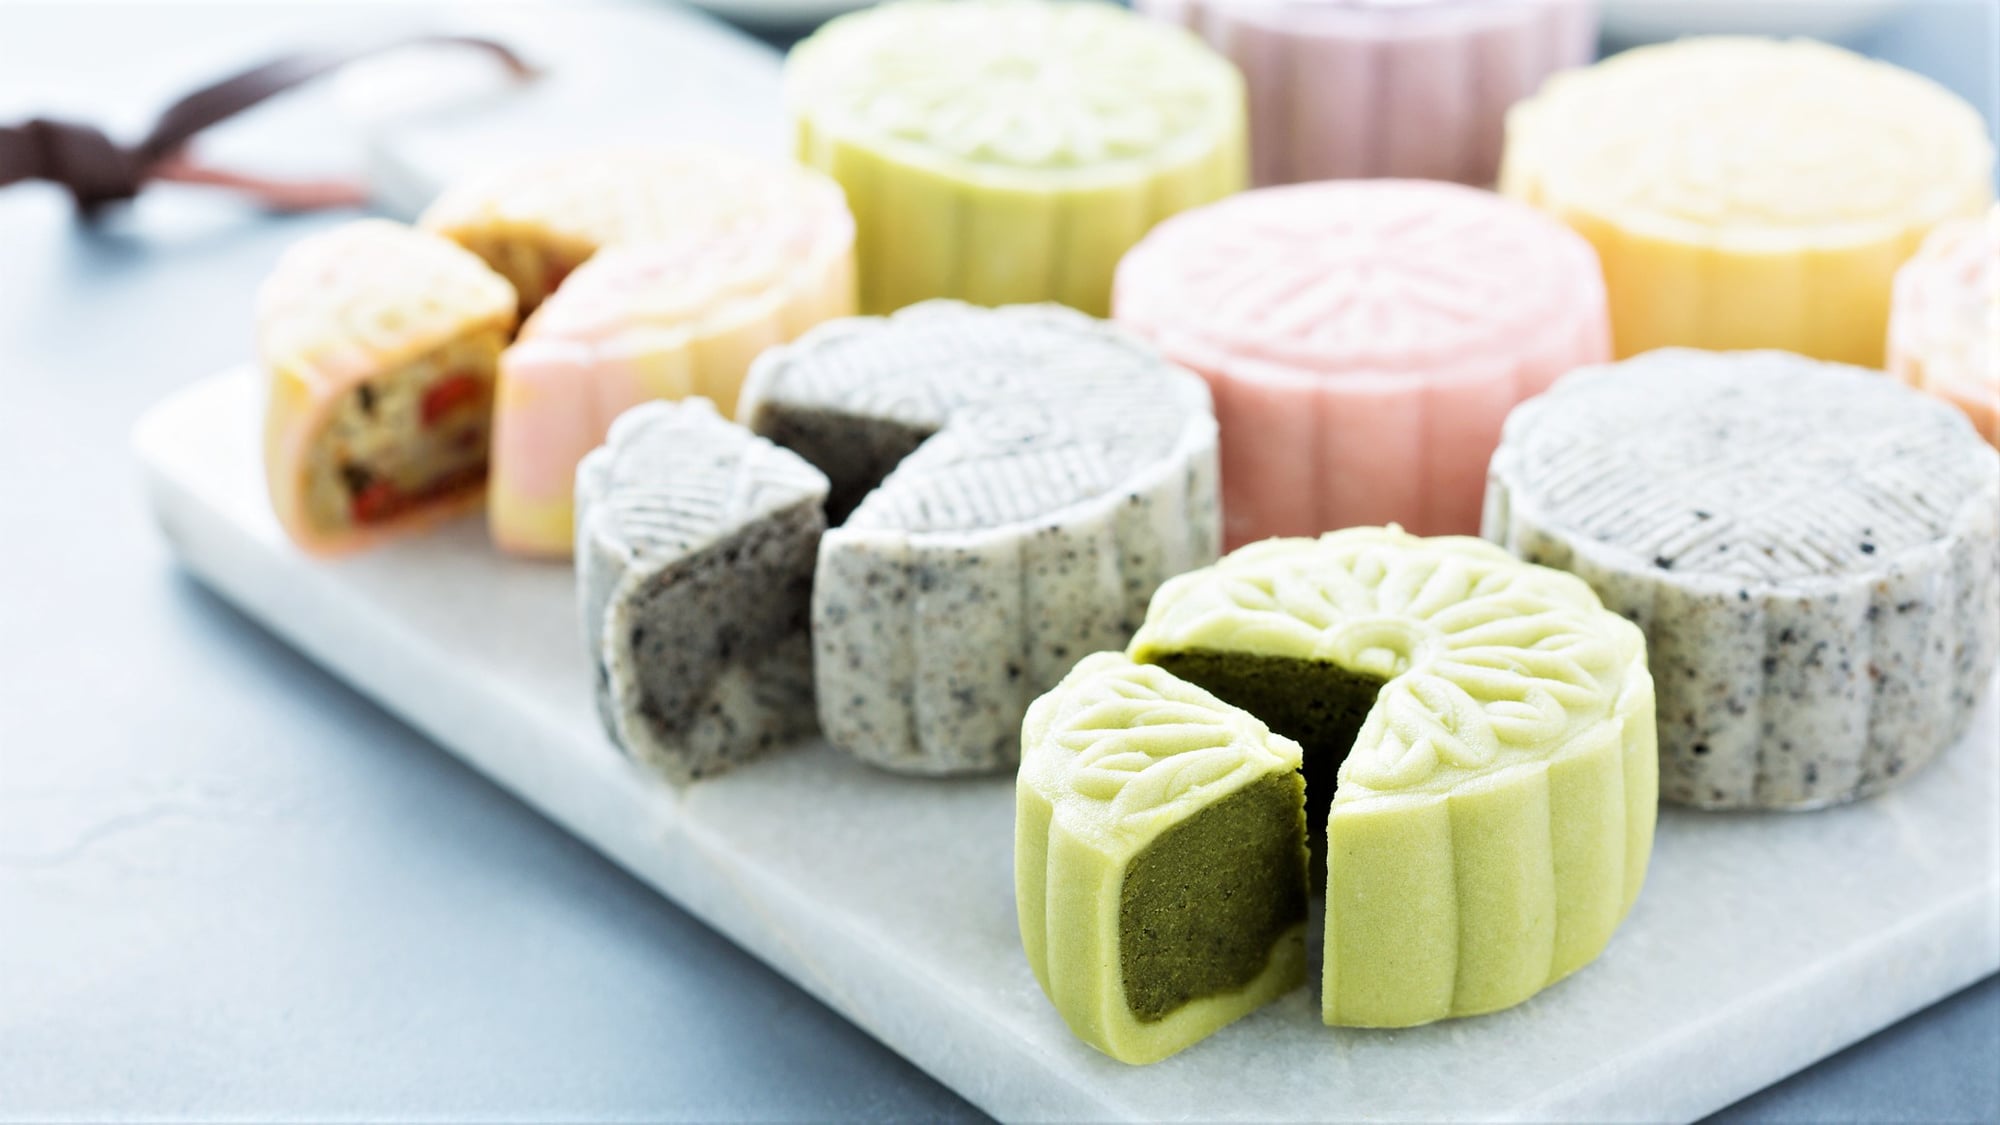 Neatly arranged snowskin mooncakes of different colors